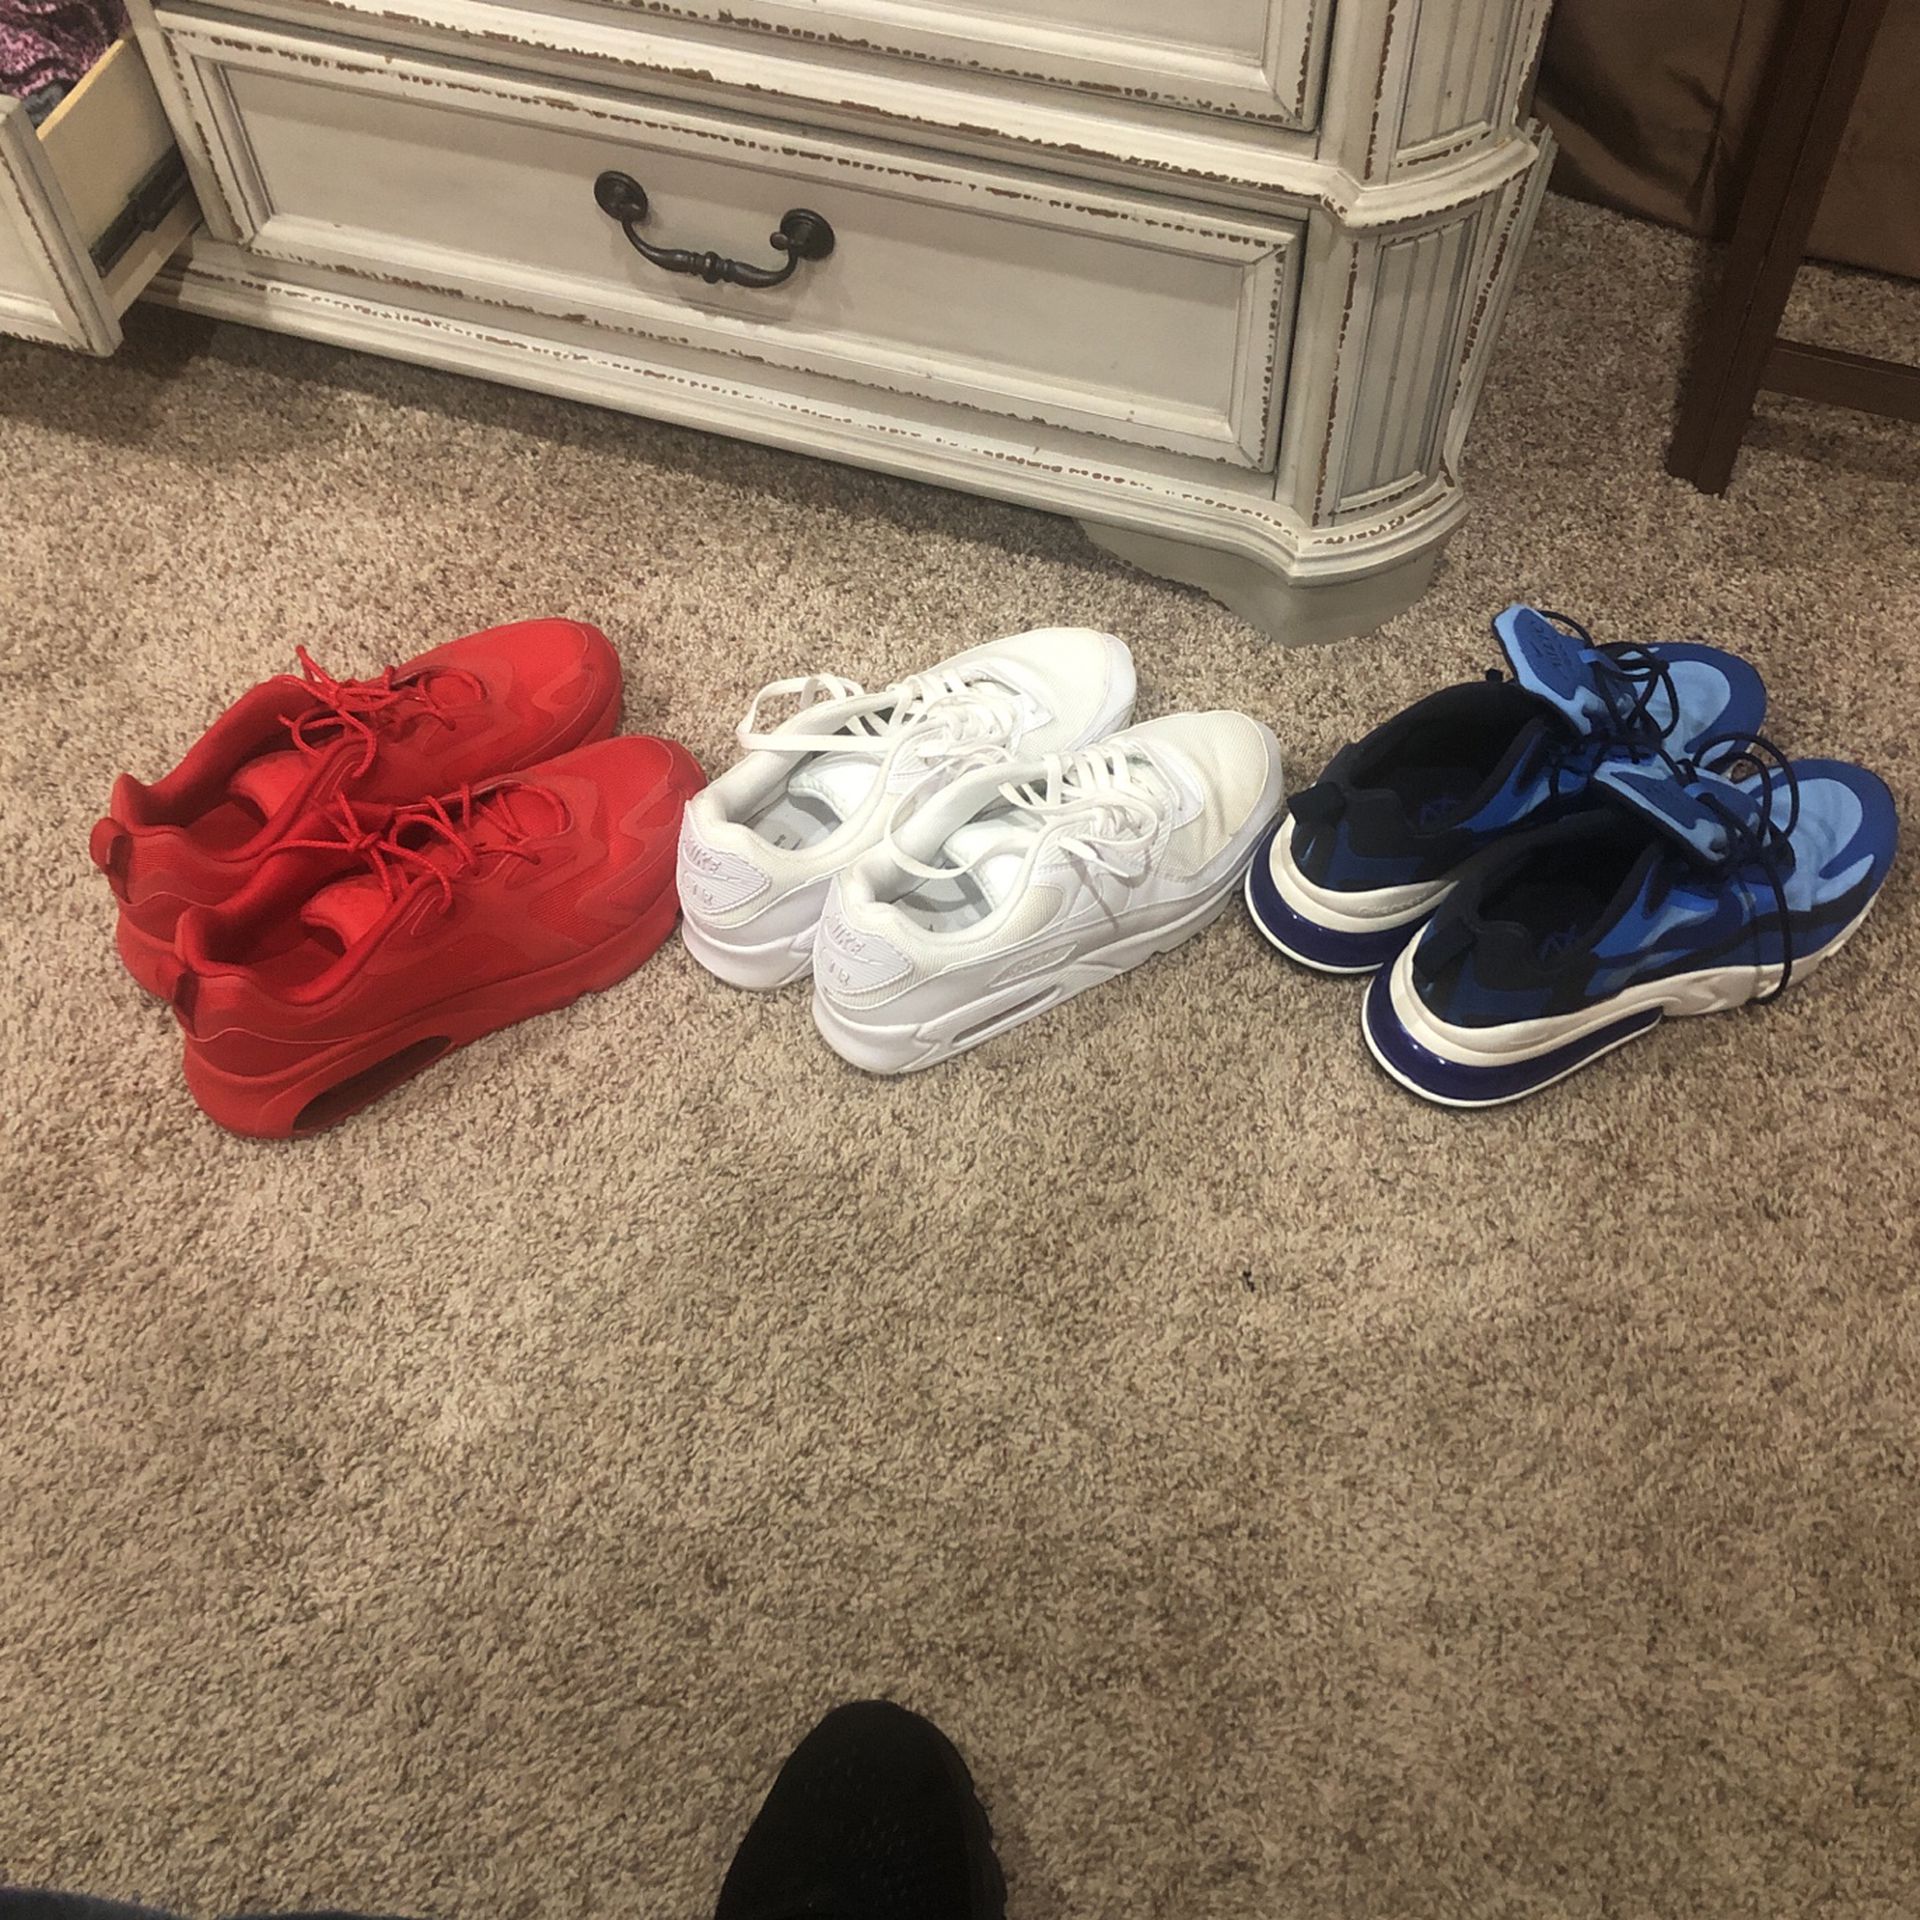 Nike’s Size 12 Each Pair $20 A Piece Are $50 For All 3 Pair